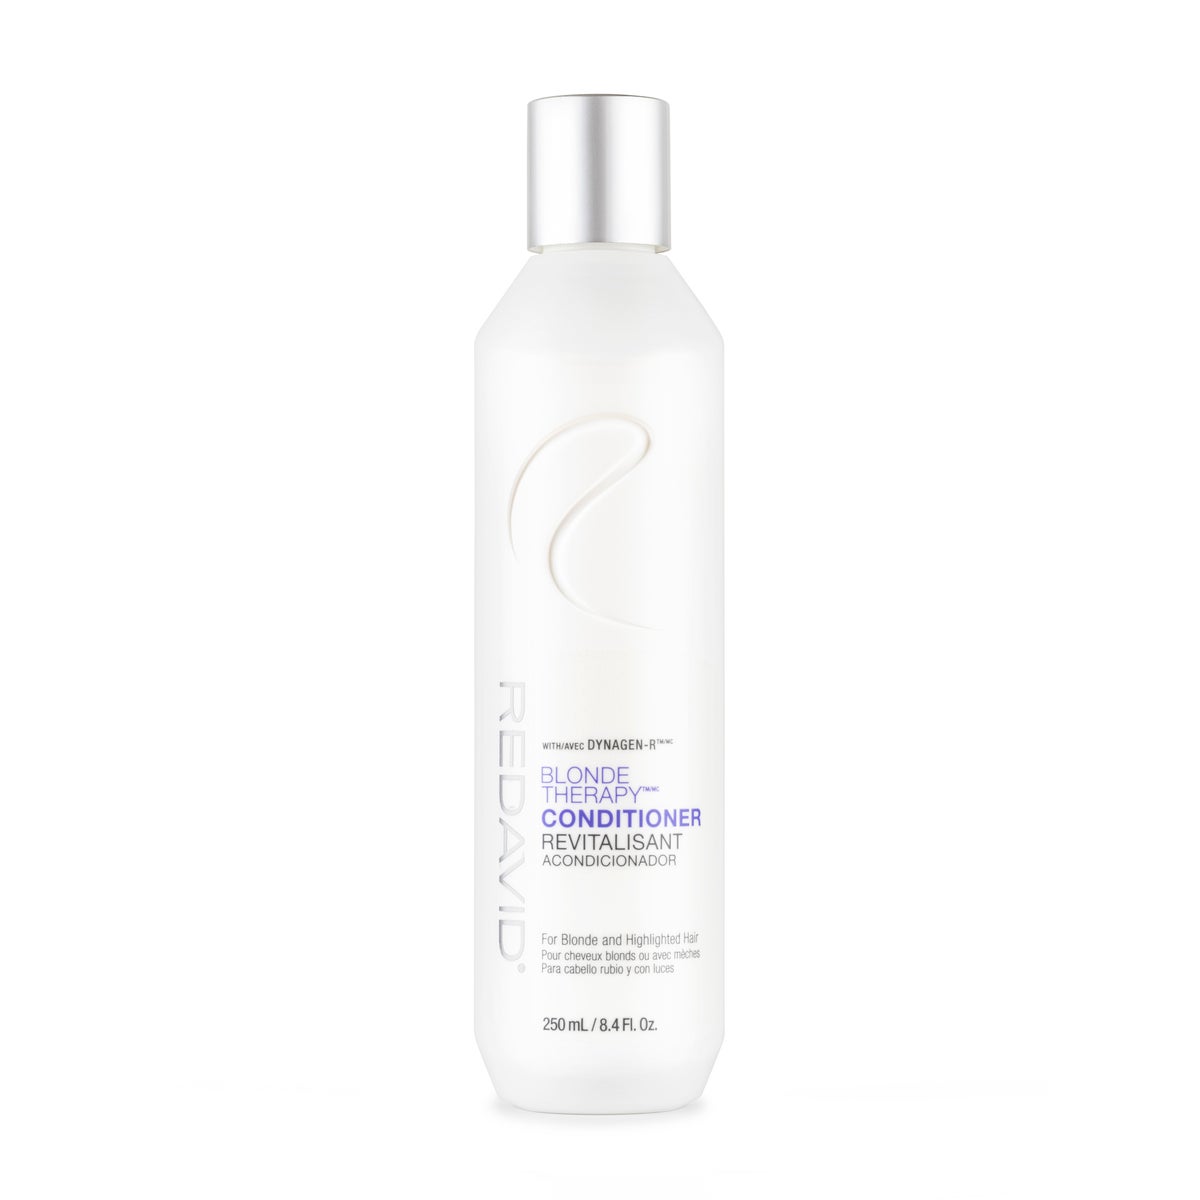 BLONDE THERAPY CONDITIONER 250ml